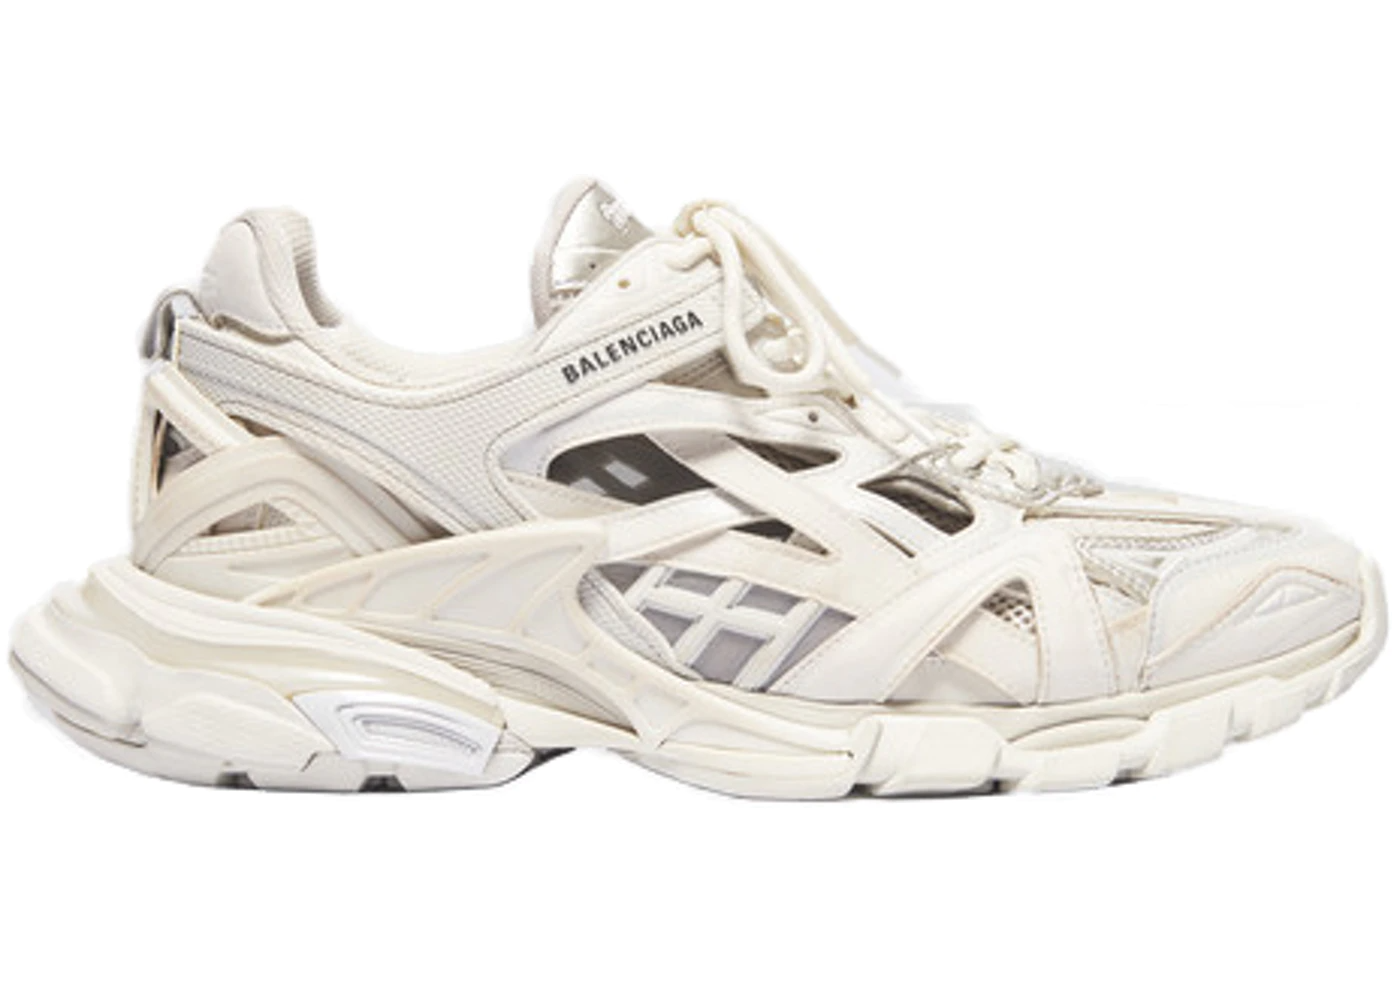 Balenciaga launches tennis shoes for more than 115 thousand pesos that you  can not wear